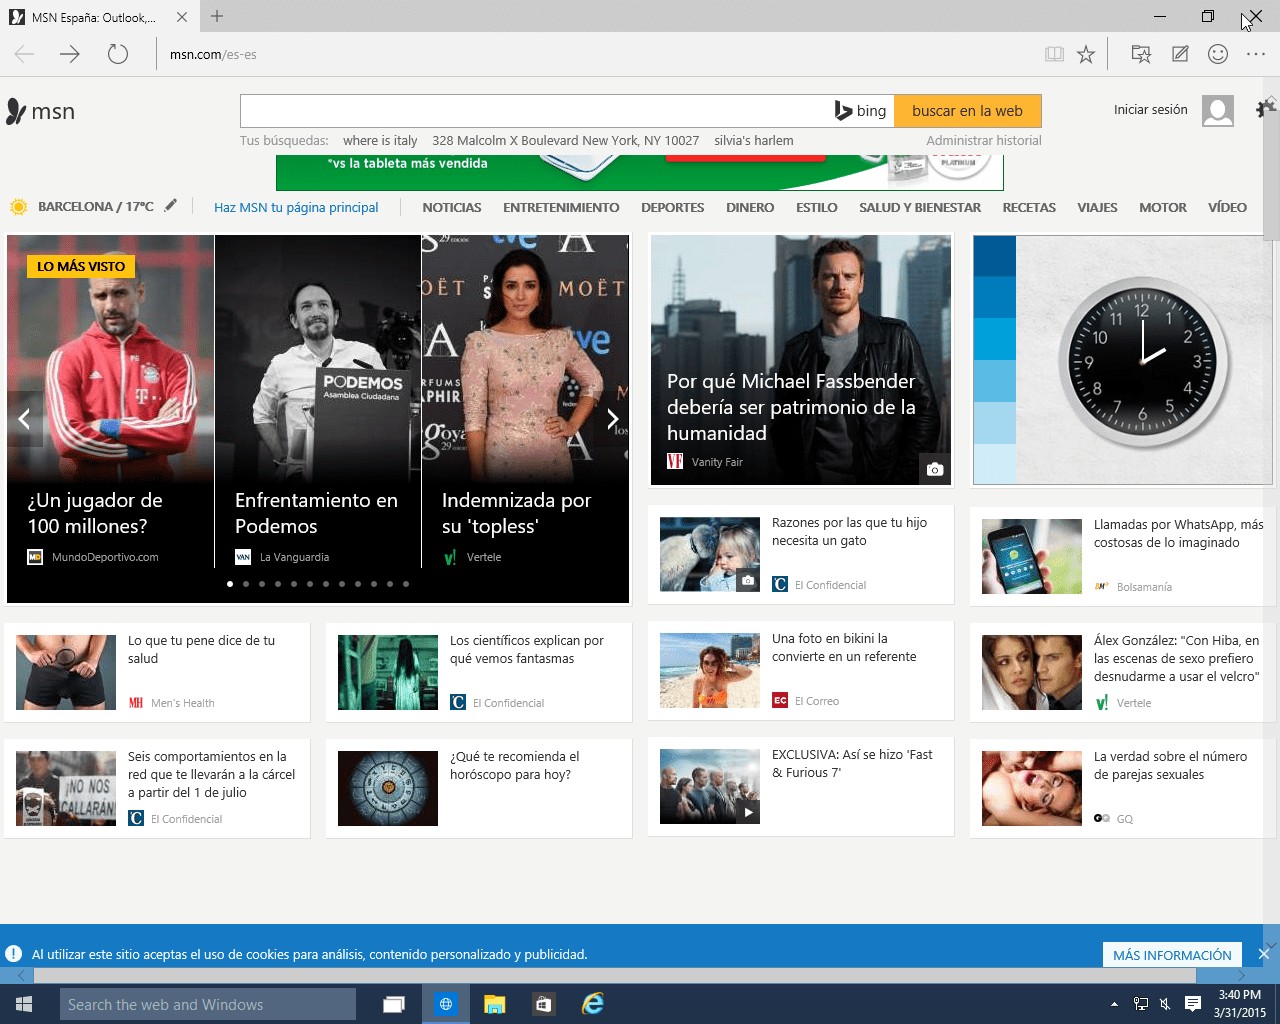 microsoft edge browser as world second